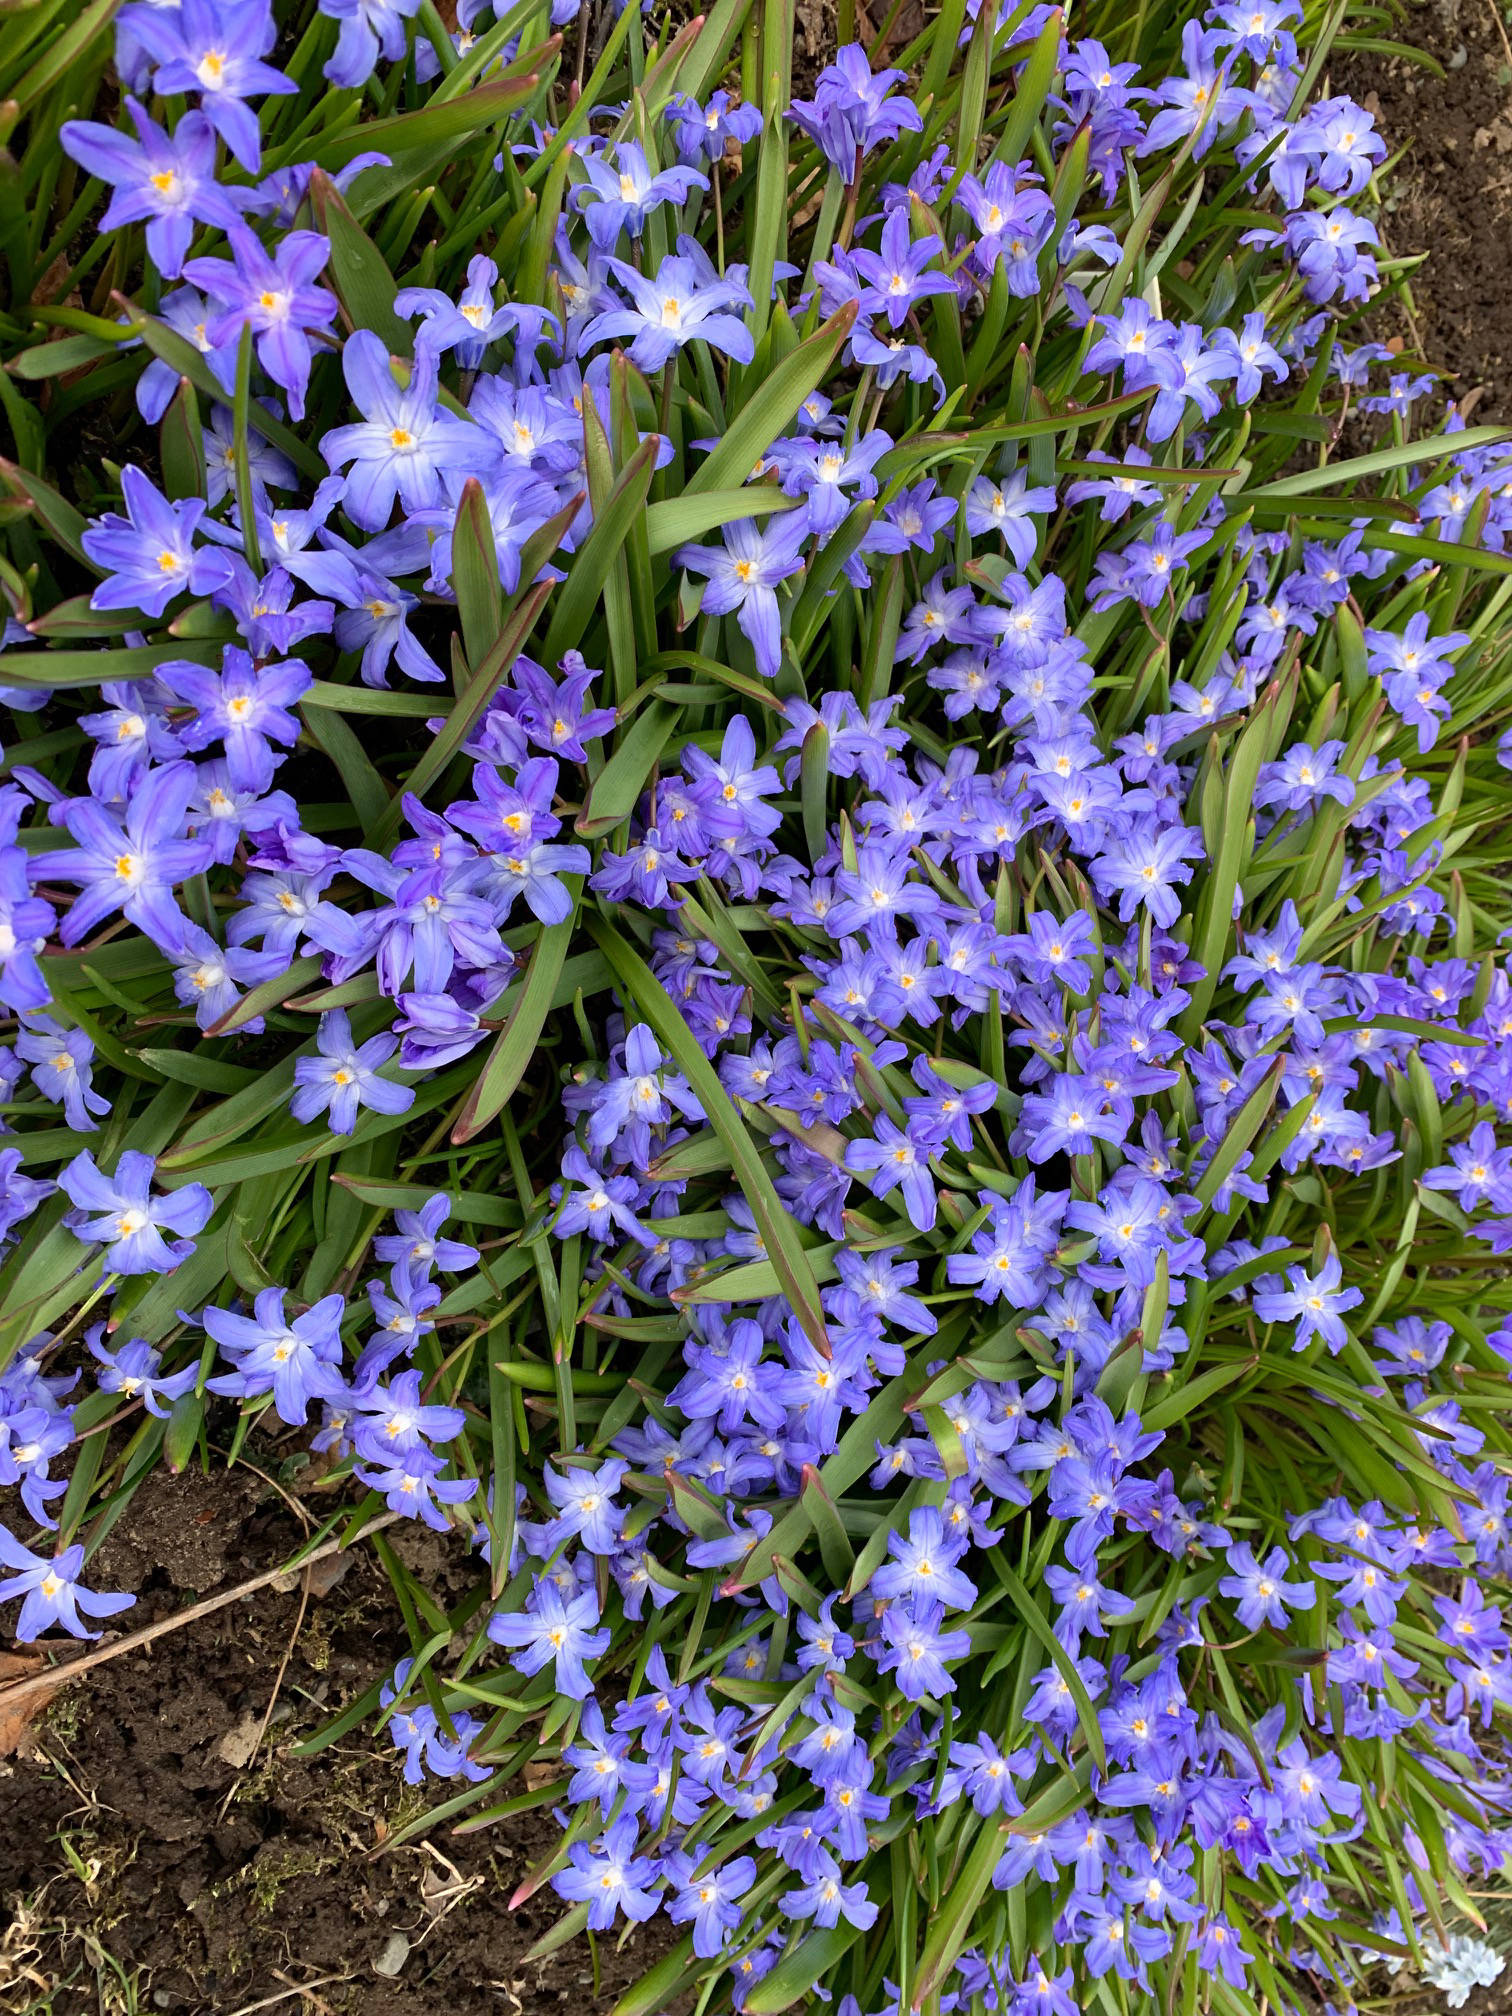 The hardy fall planted spring blooming bulb chionodoxa may be worse for wear after being battered by wind and snow, but it bravely offers up its glory as seen in this photo taken April 19, 2019, in Homer, Alaska. (Photo by Rosemary Fitzpatrick)